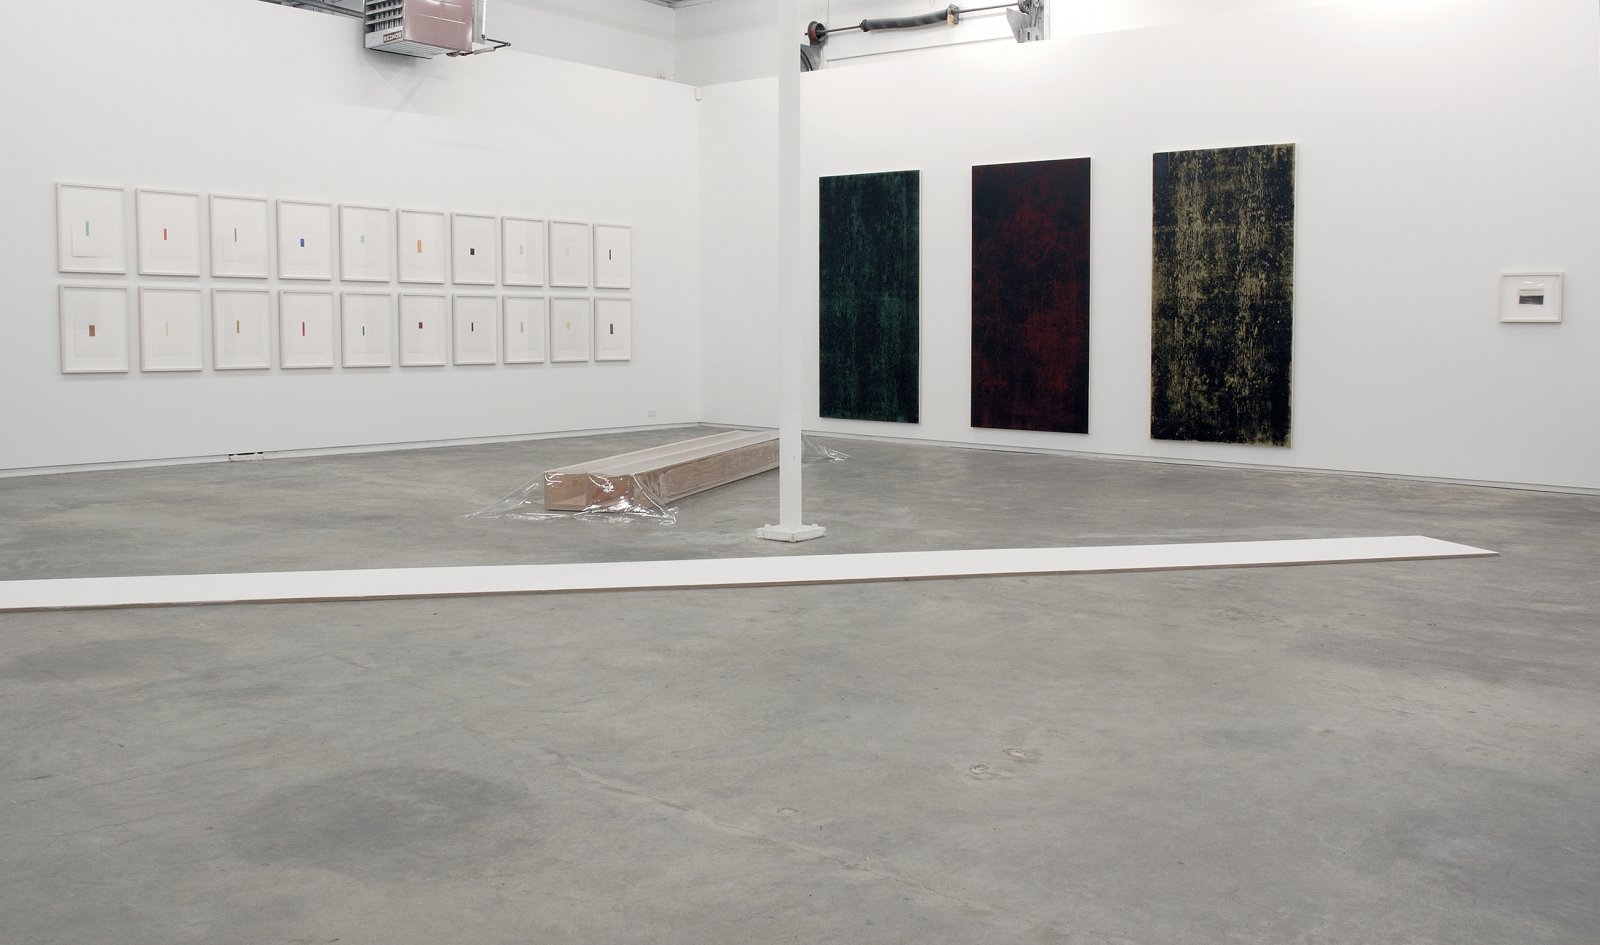 ​Ian Wallace, installation view, Catriona Jeffries, 2007 by Ian Wallace